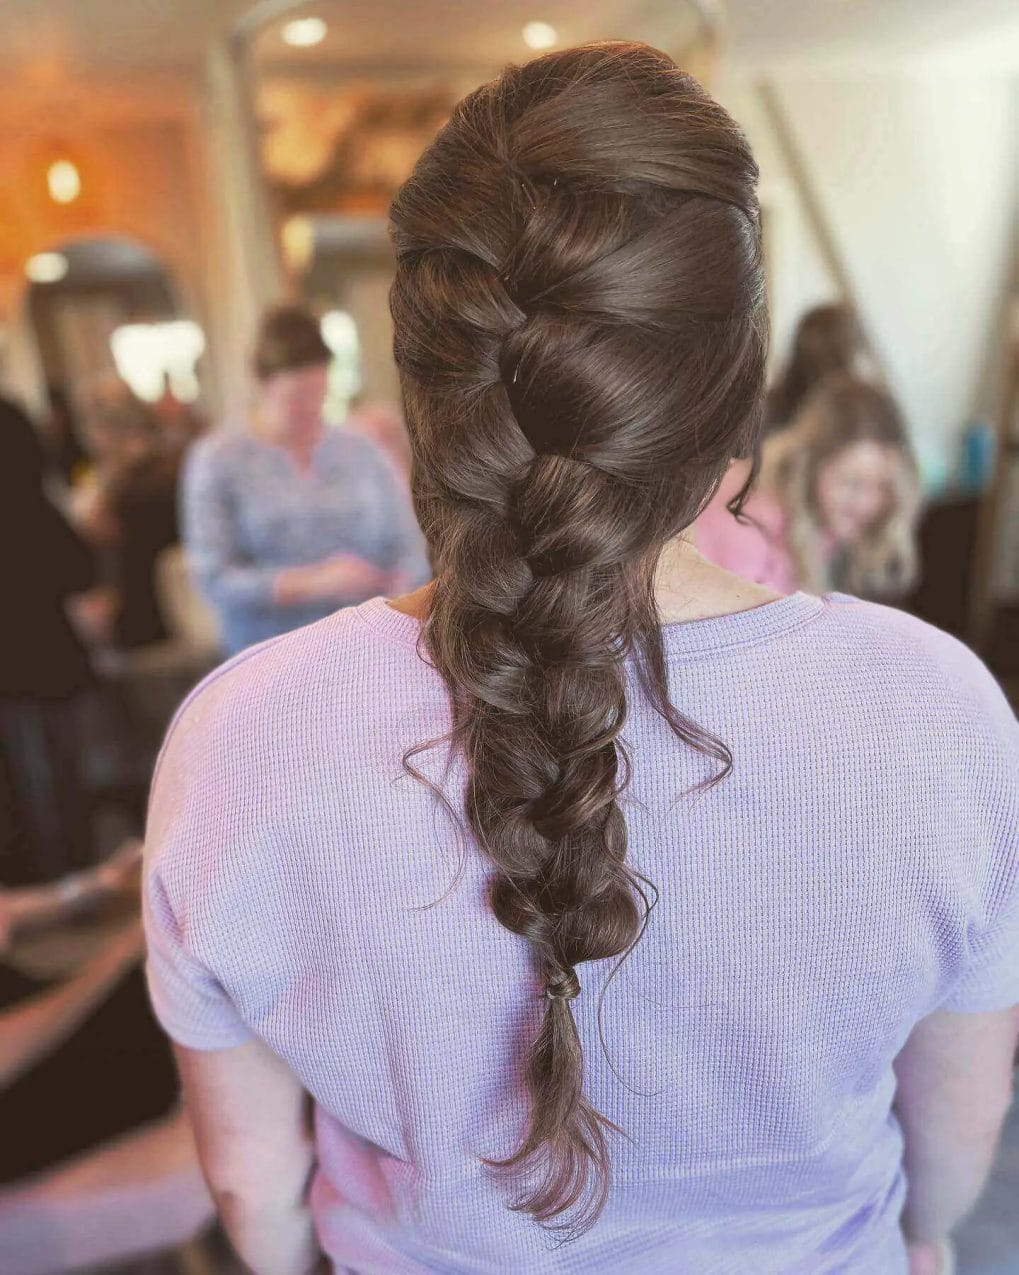 Smooth flowing French braid in glossy chestnut, starting above the ears.